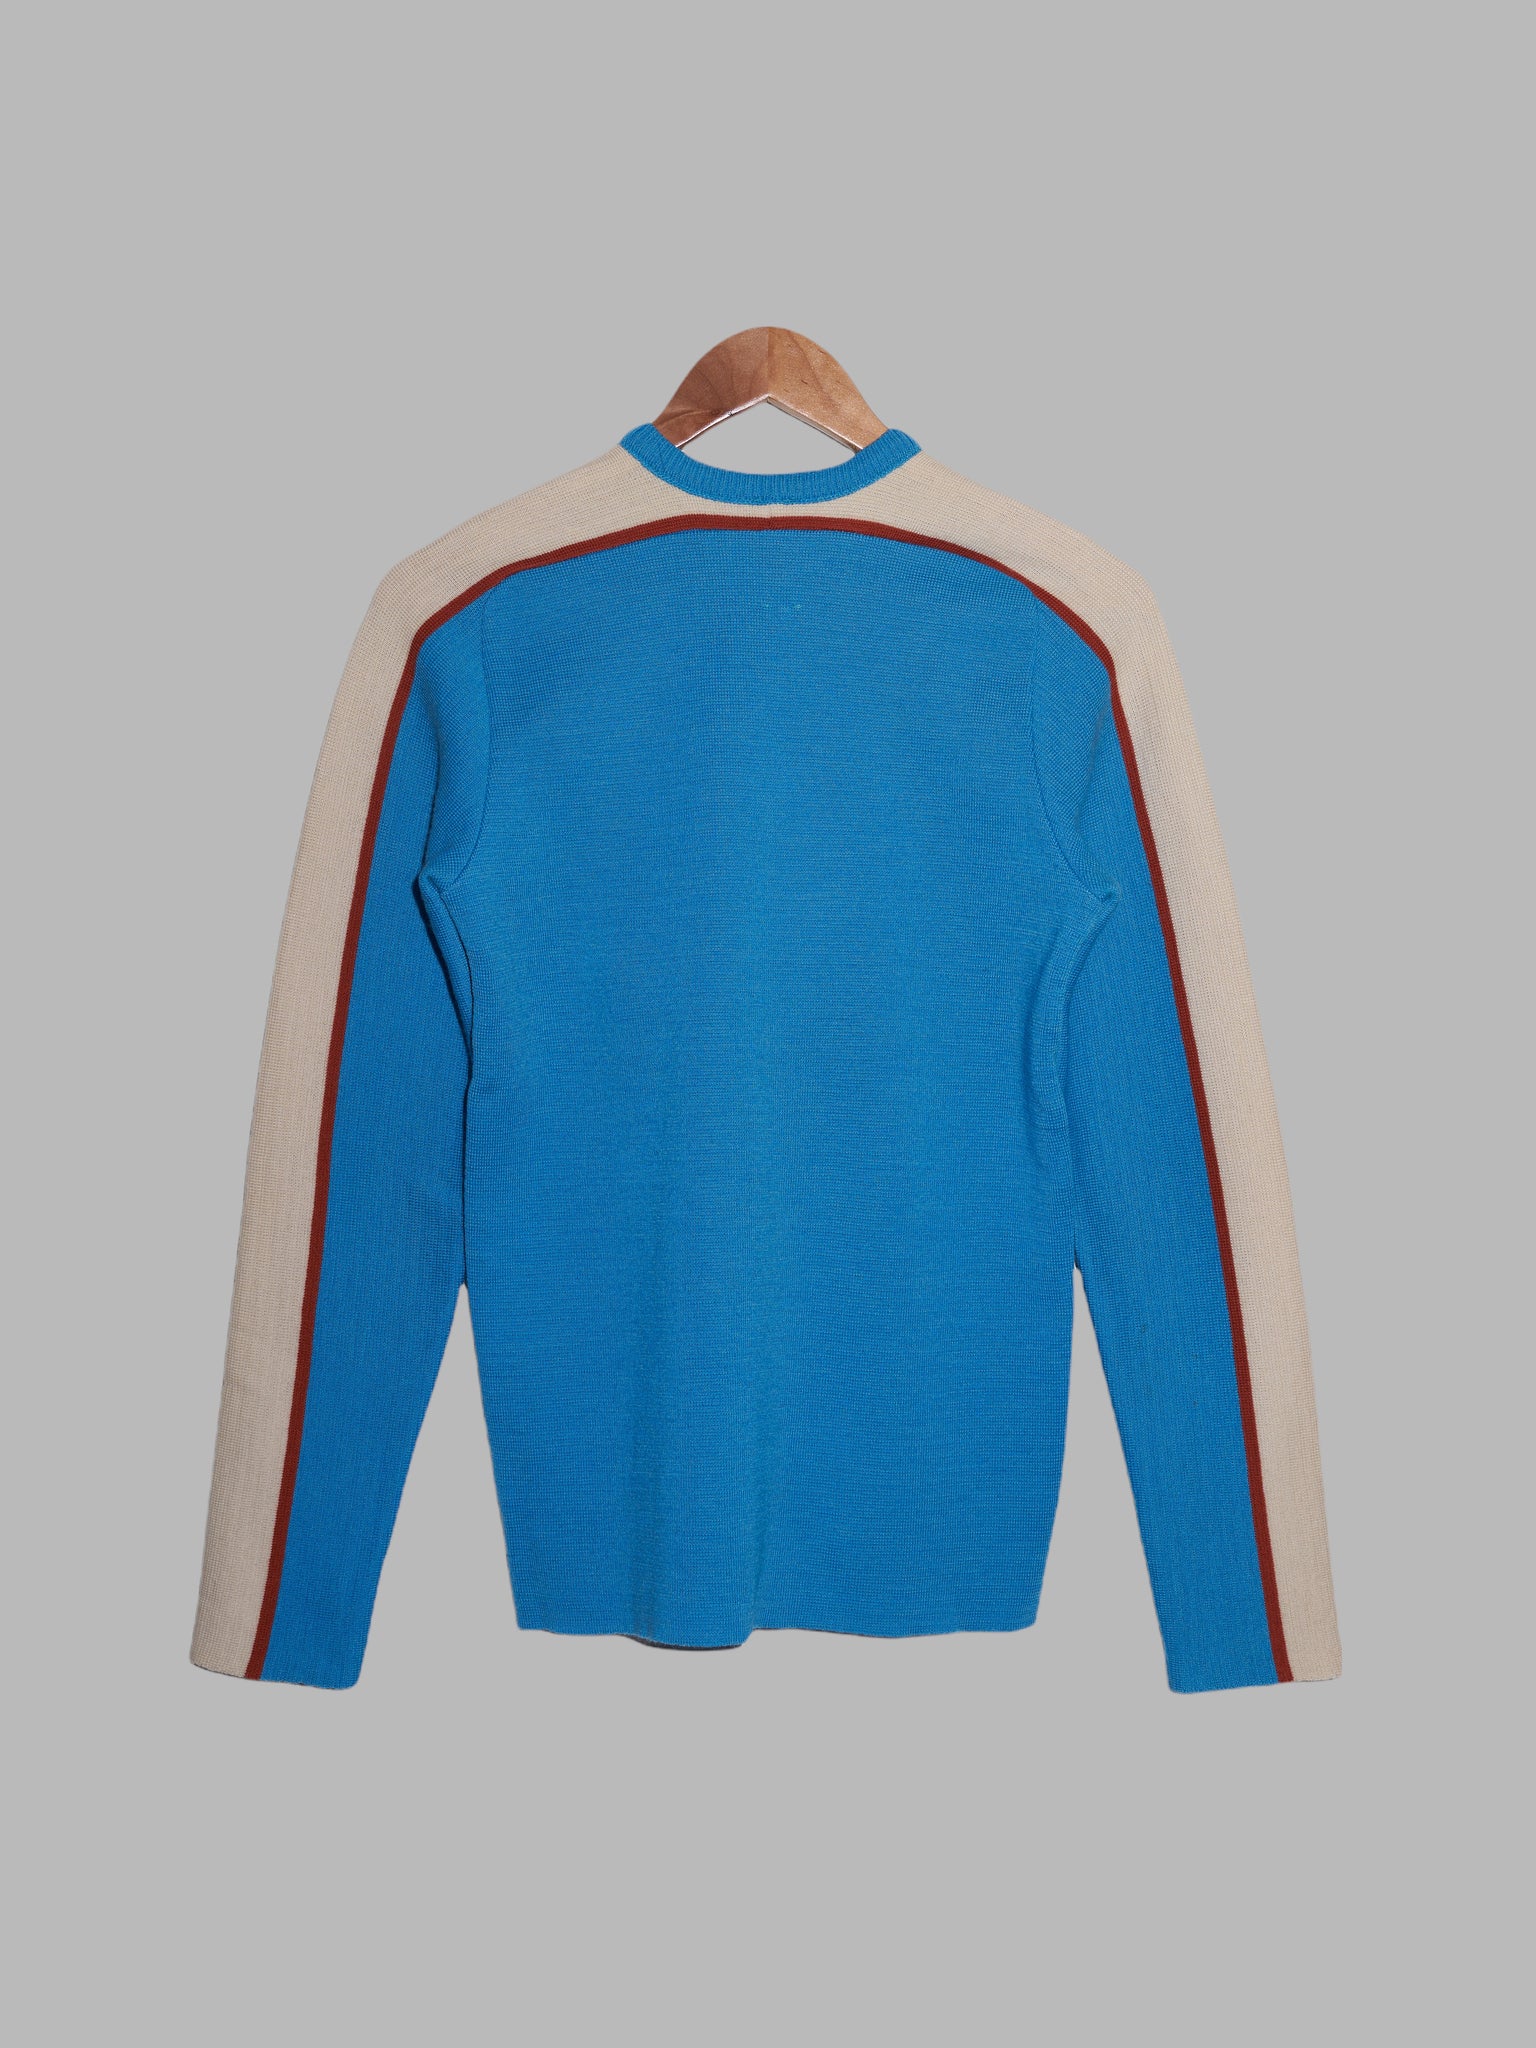 Christophe Lemaire 1990s blue wool v neck jumper with contrast sleeve - 1 XS